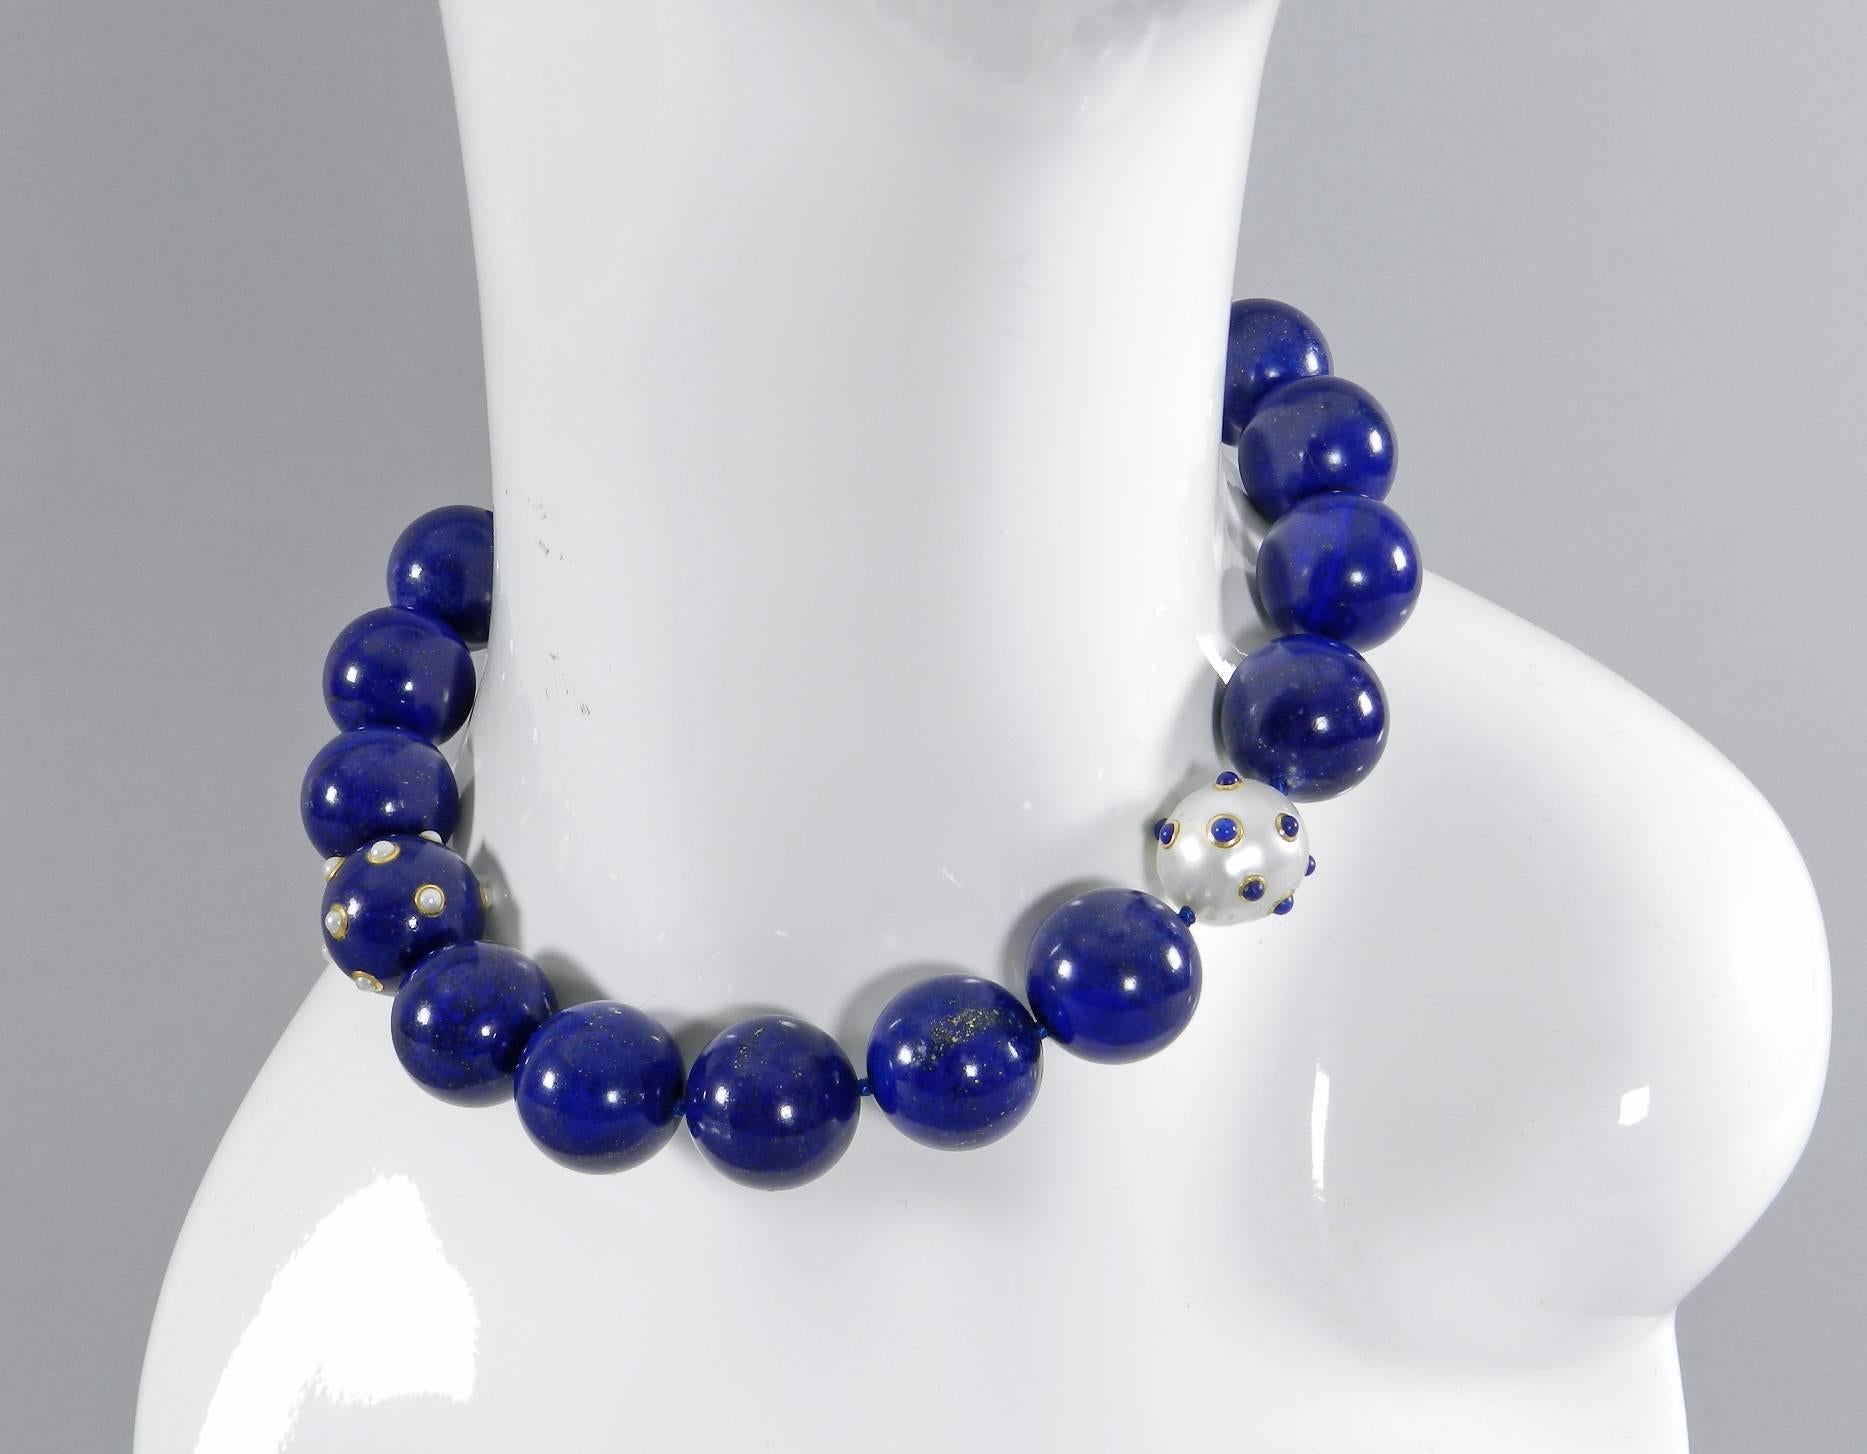 Angela Cummings lapis lazuli and pearl beaded choker necklace. Unsigned but original owner had this custom made by Angela Cummings and was a major client. The necklace is from the 1990's. She then had the necklace custom altered at Verdura, adding